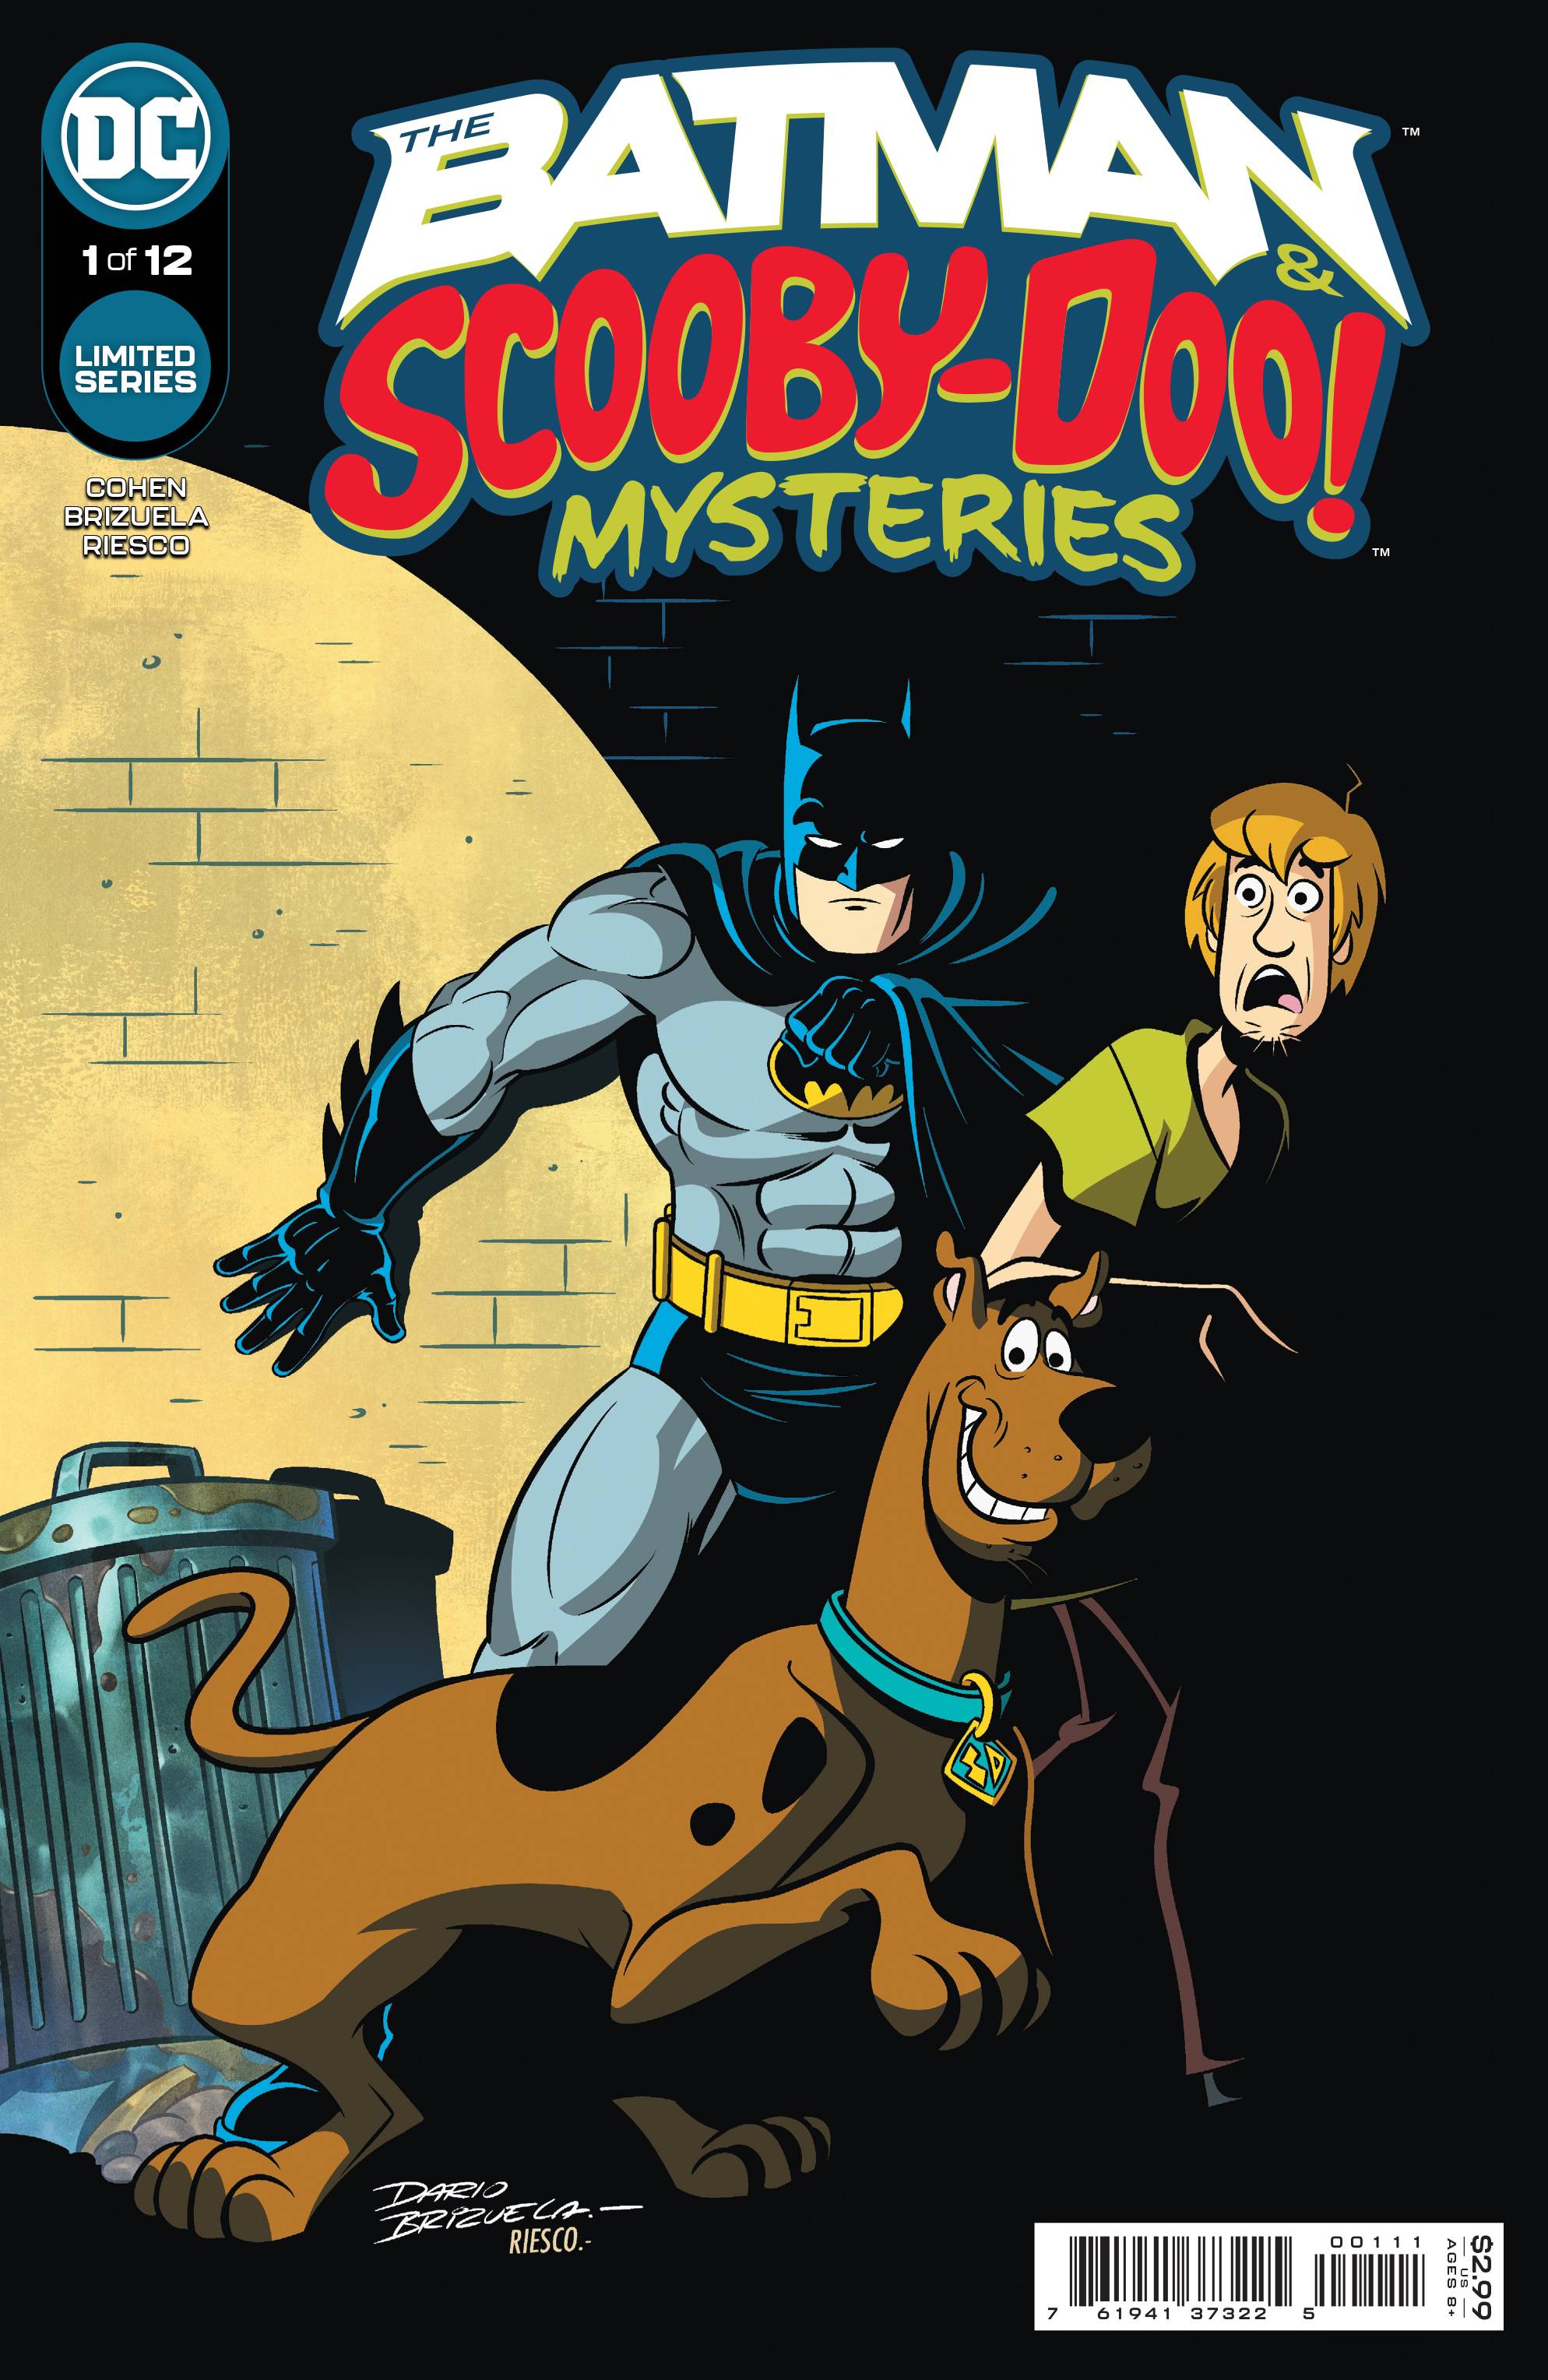 BATMAN & SCOOBY DOO MYSTERIES #1 | Game Master's Emporium (The New GME)